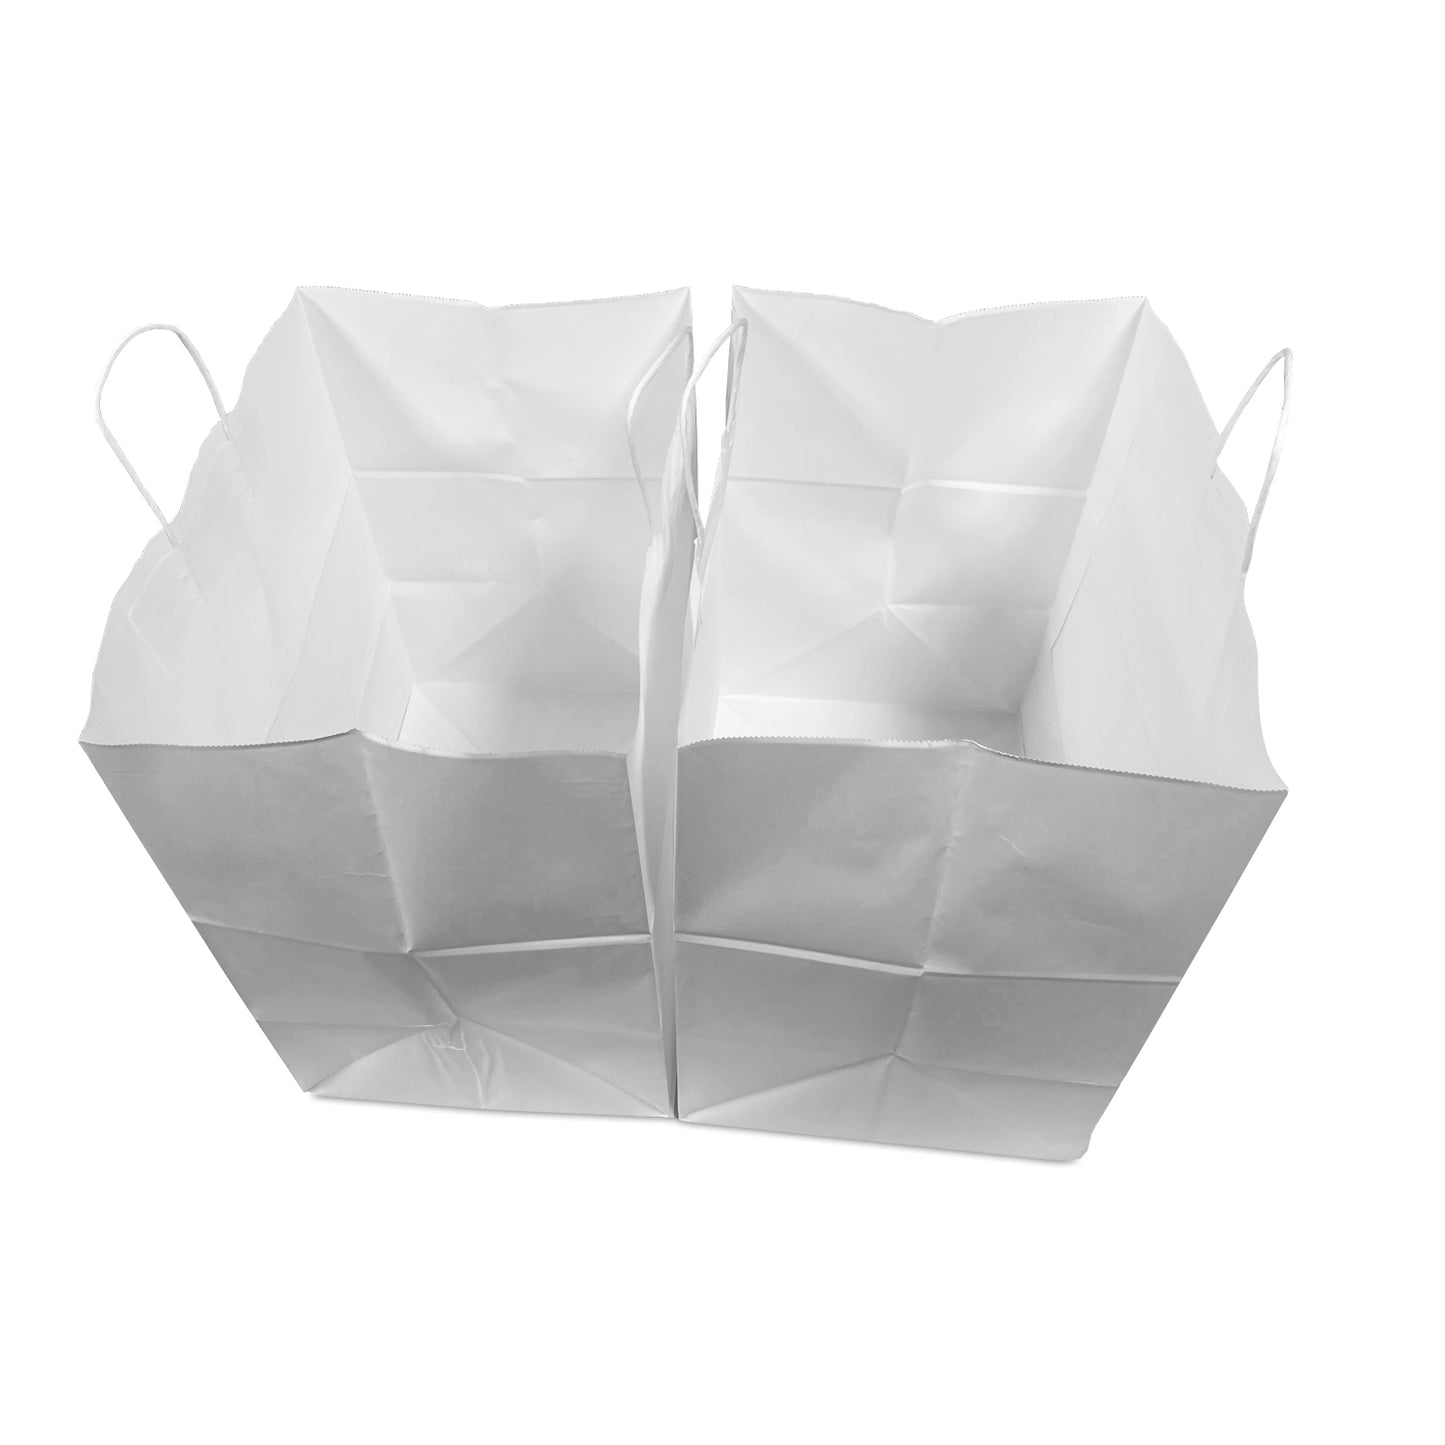 200 Pcs, Dumbo, 15x10.5x16.5 inches, White Kraft Paper Bags, with Twisted Handles